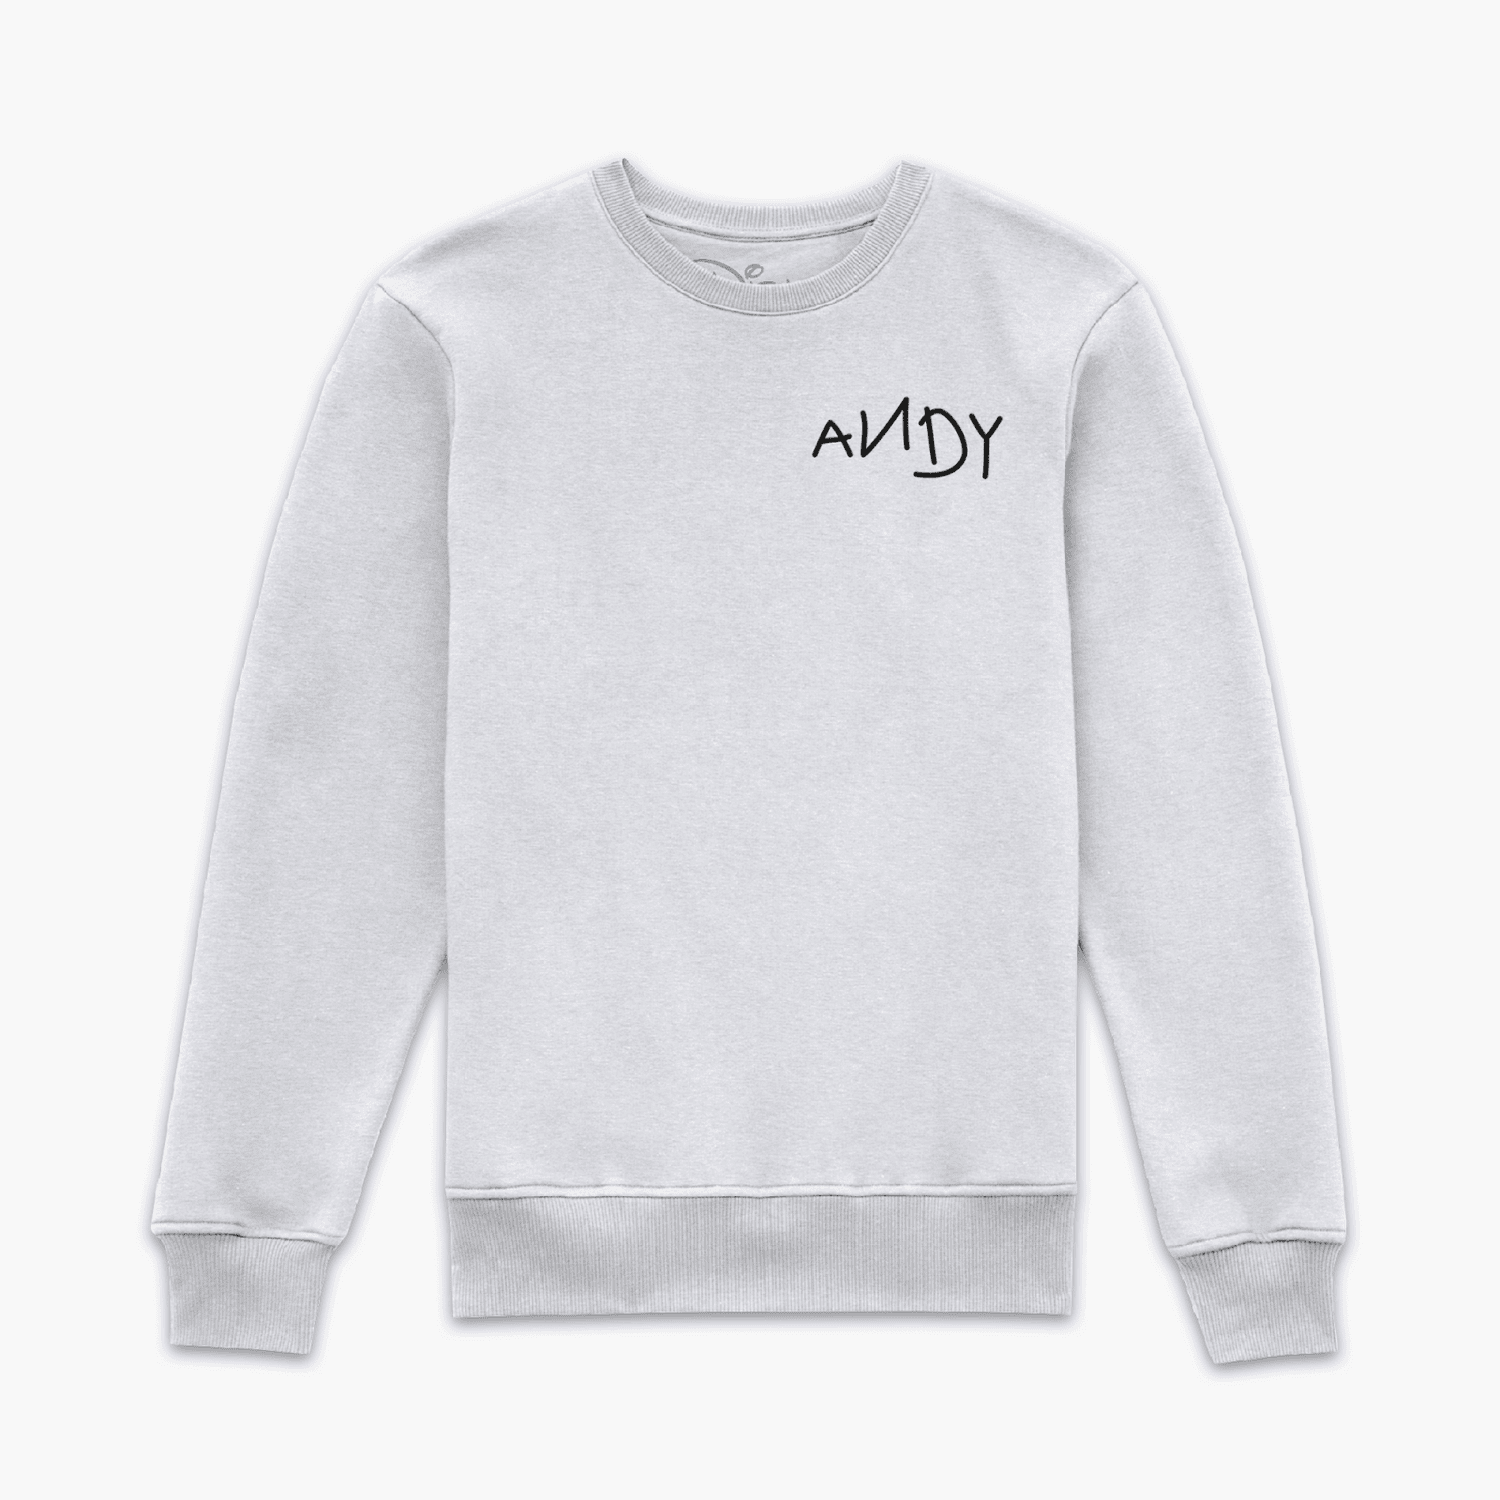 Andy's Toy Collection Sweatshirt - Blanc